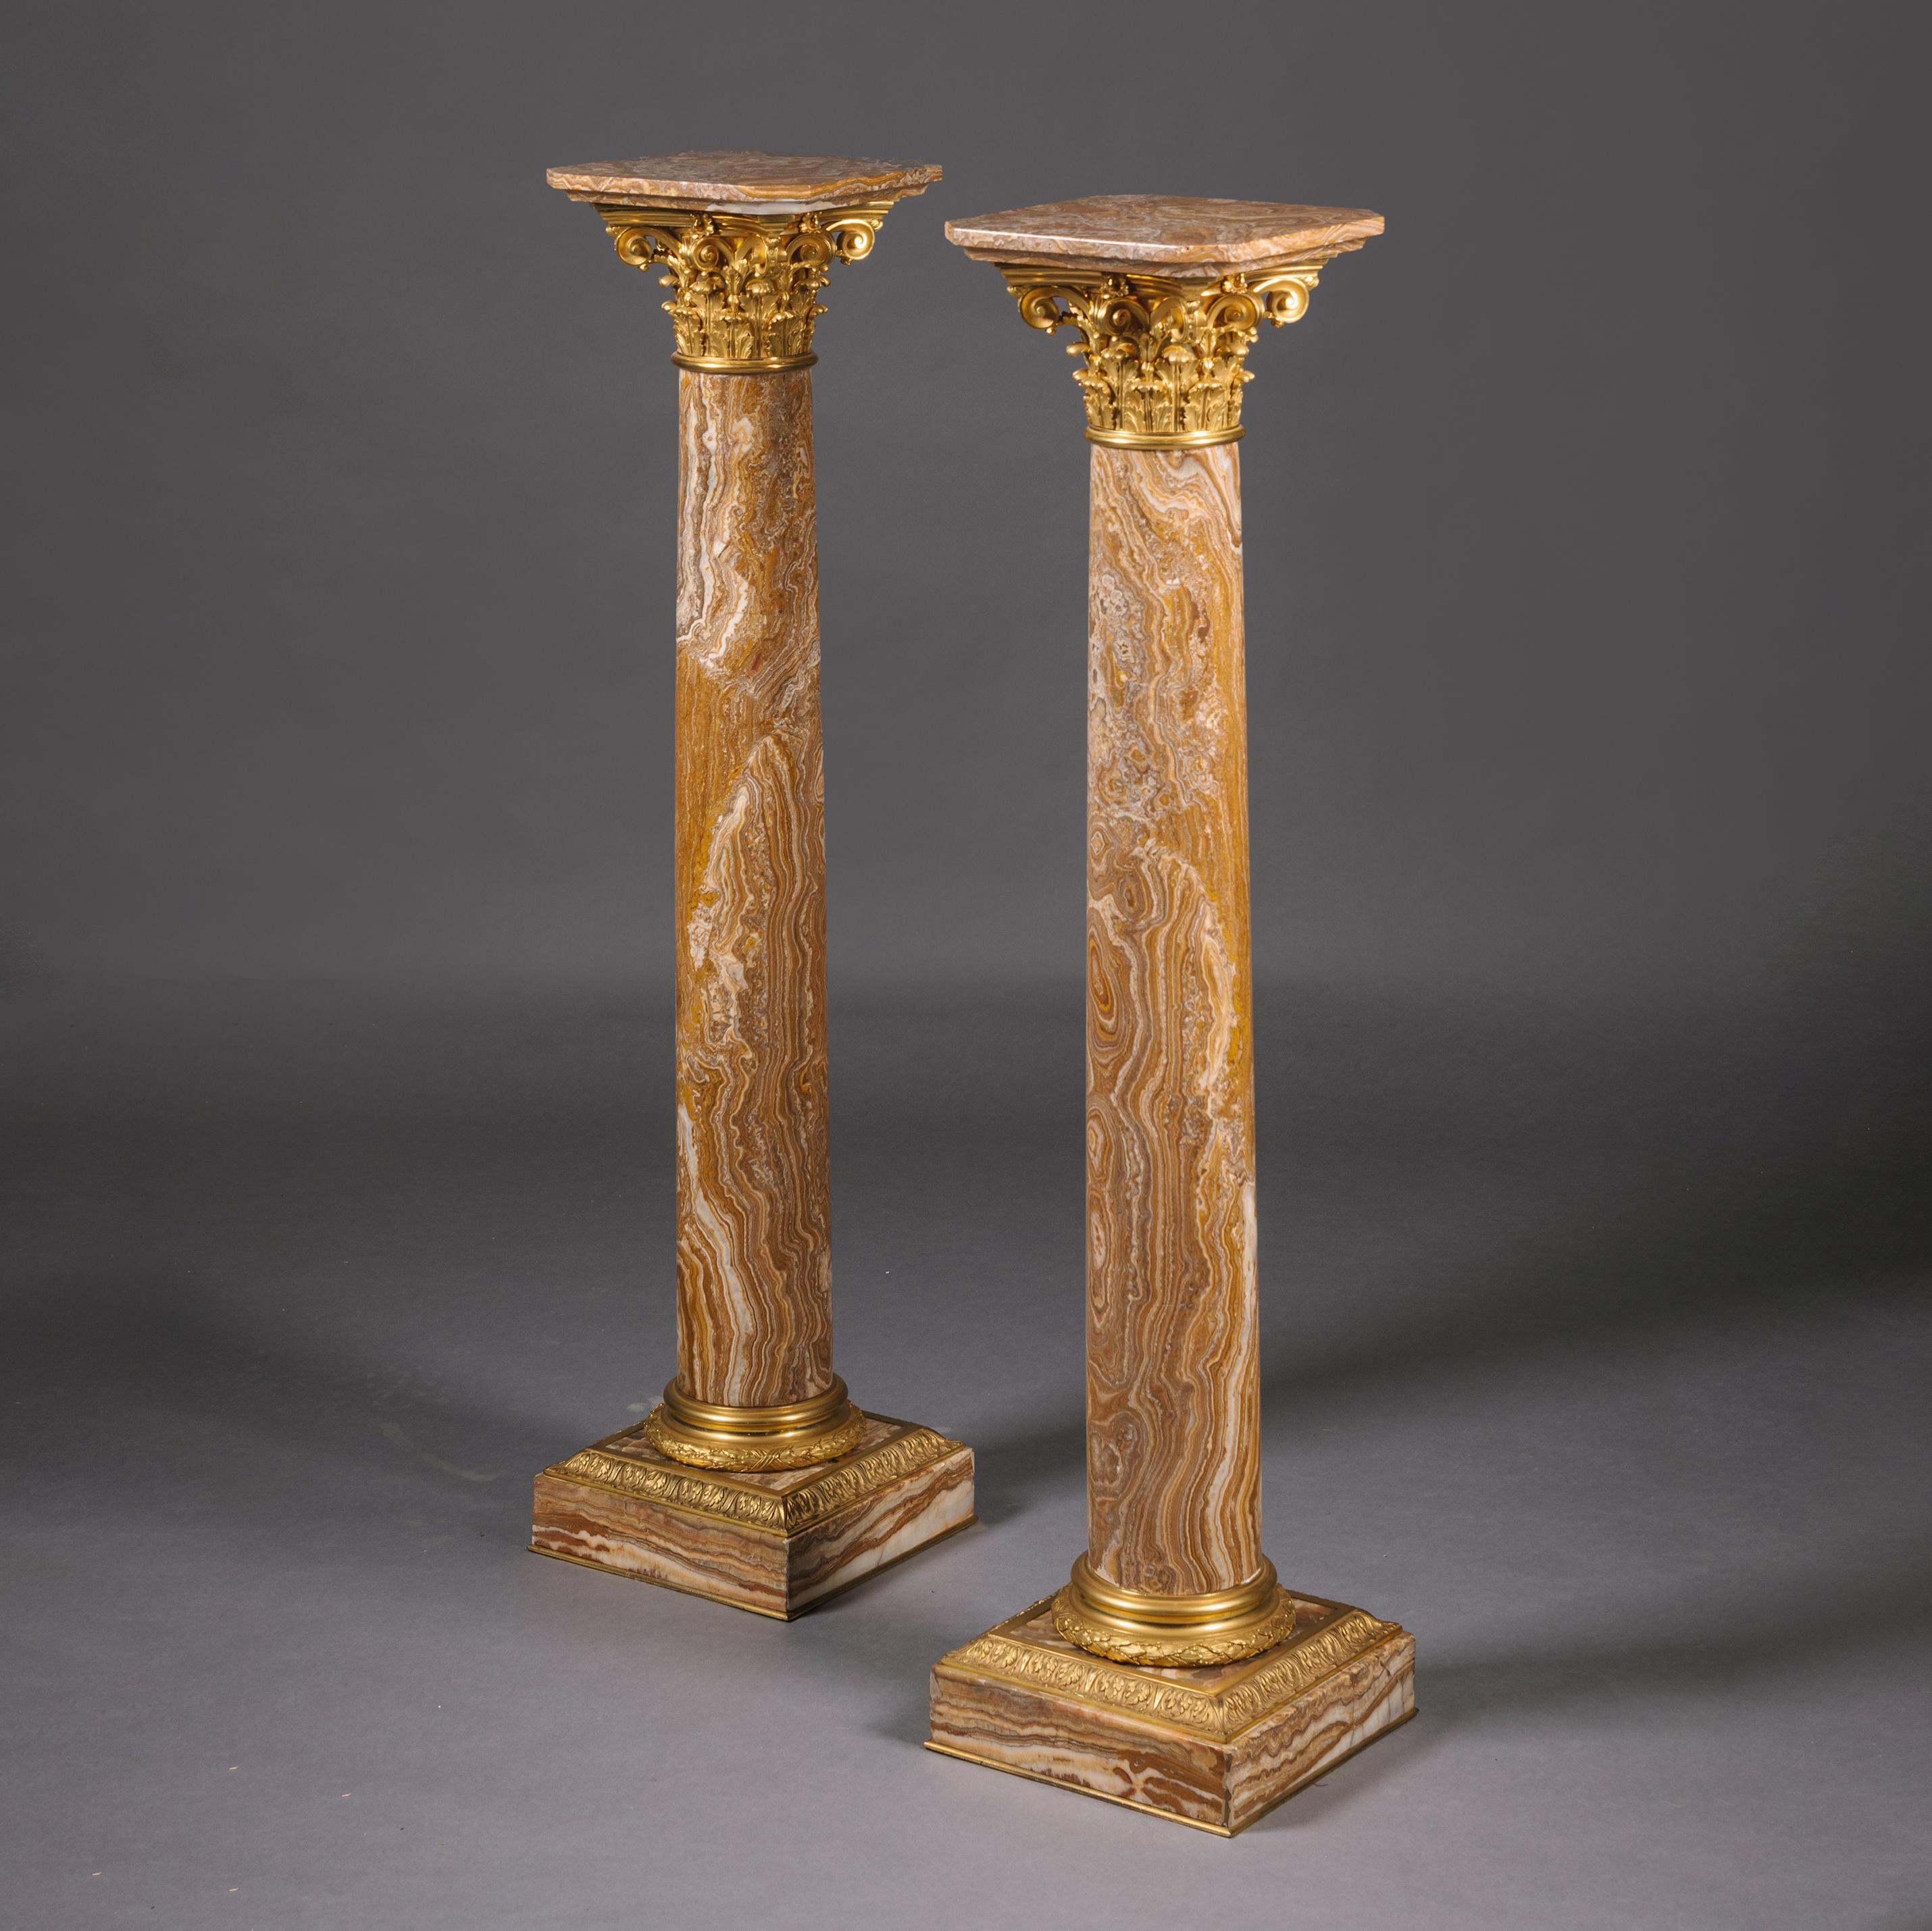 A Pair of Louis XVI Style Gilt-Bronze Mounted Alabastro Fiorito Antico Pedestal Columns. 

The pedestals are of classical form with finely figured Alabastro Foiorito columns and gilt-bronze Corinthian capitals and laurel leaf plinth bases.  Each